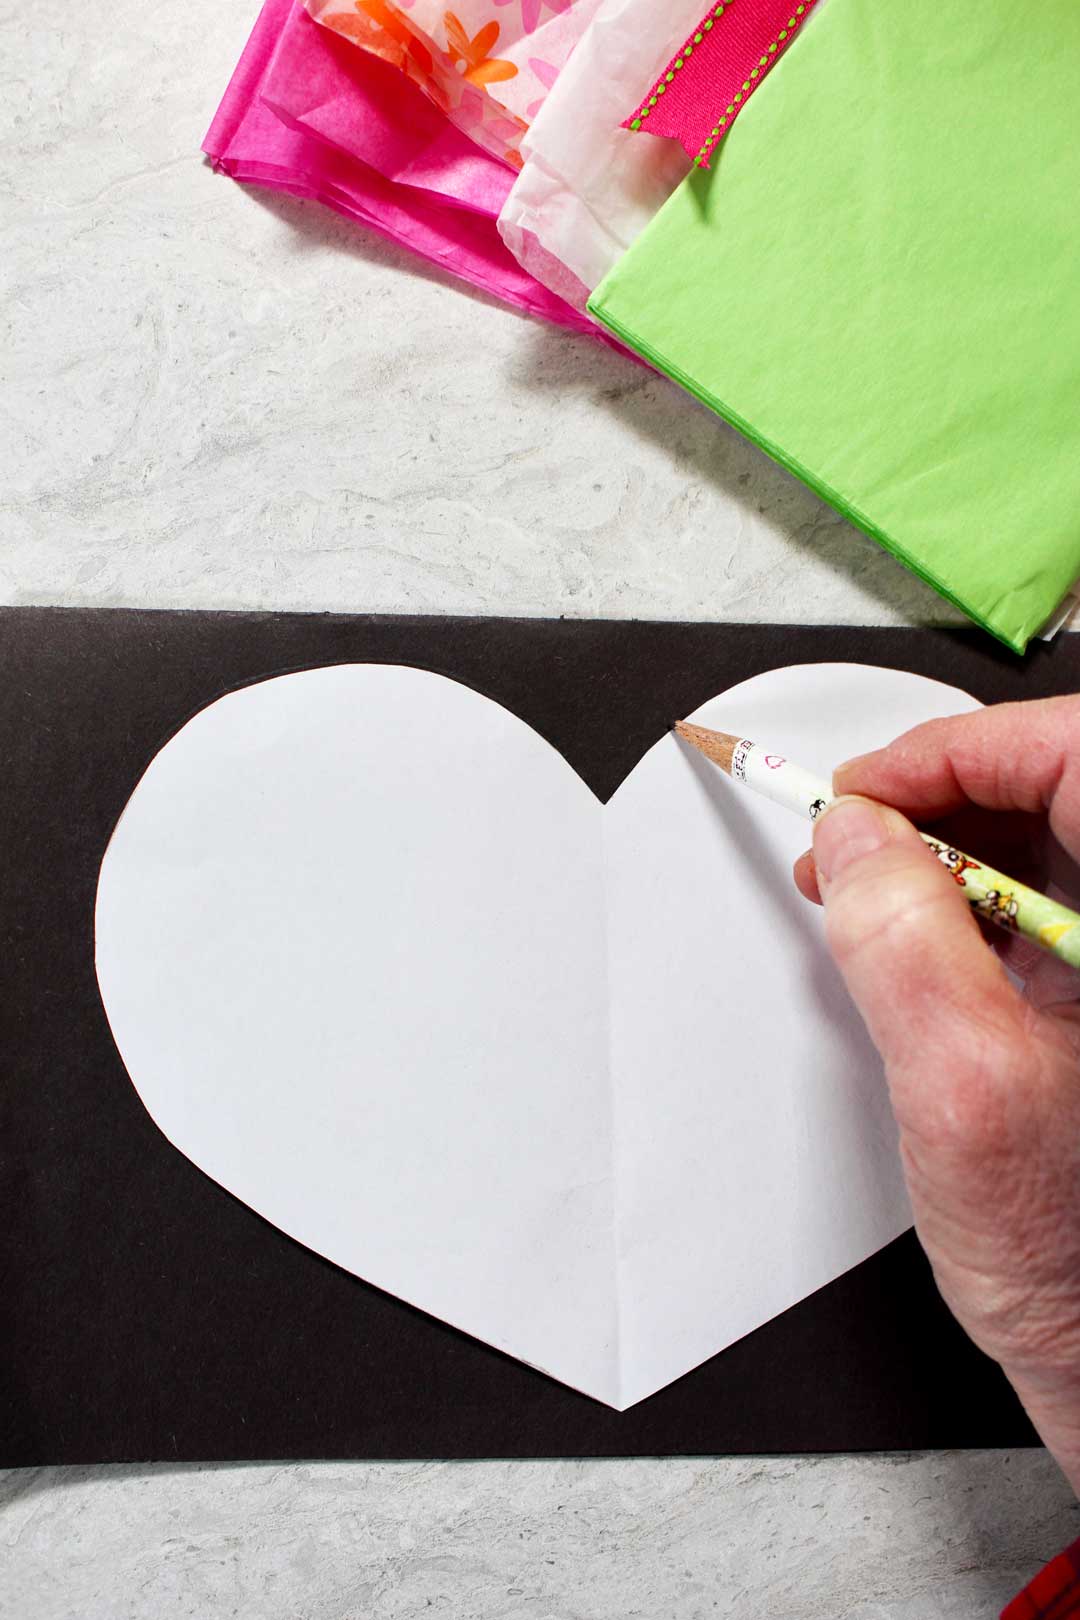 Pink, green and flower patterned tissue paper near a pencil outlining a heart on a black piece of paper.